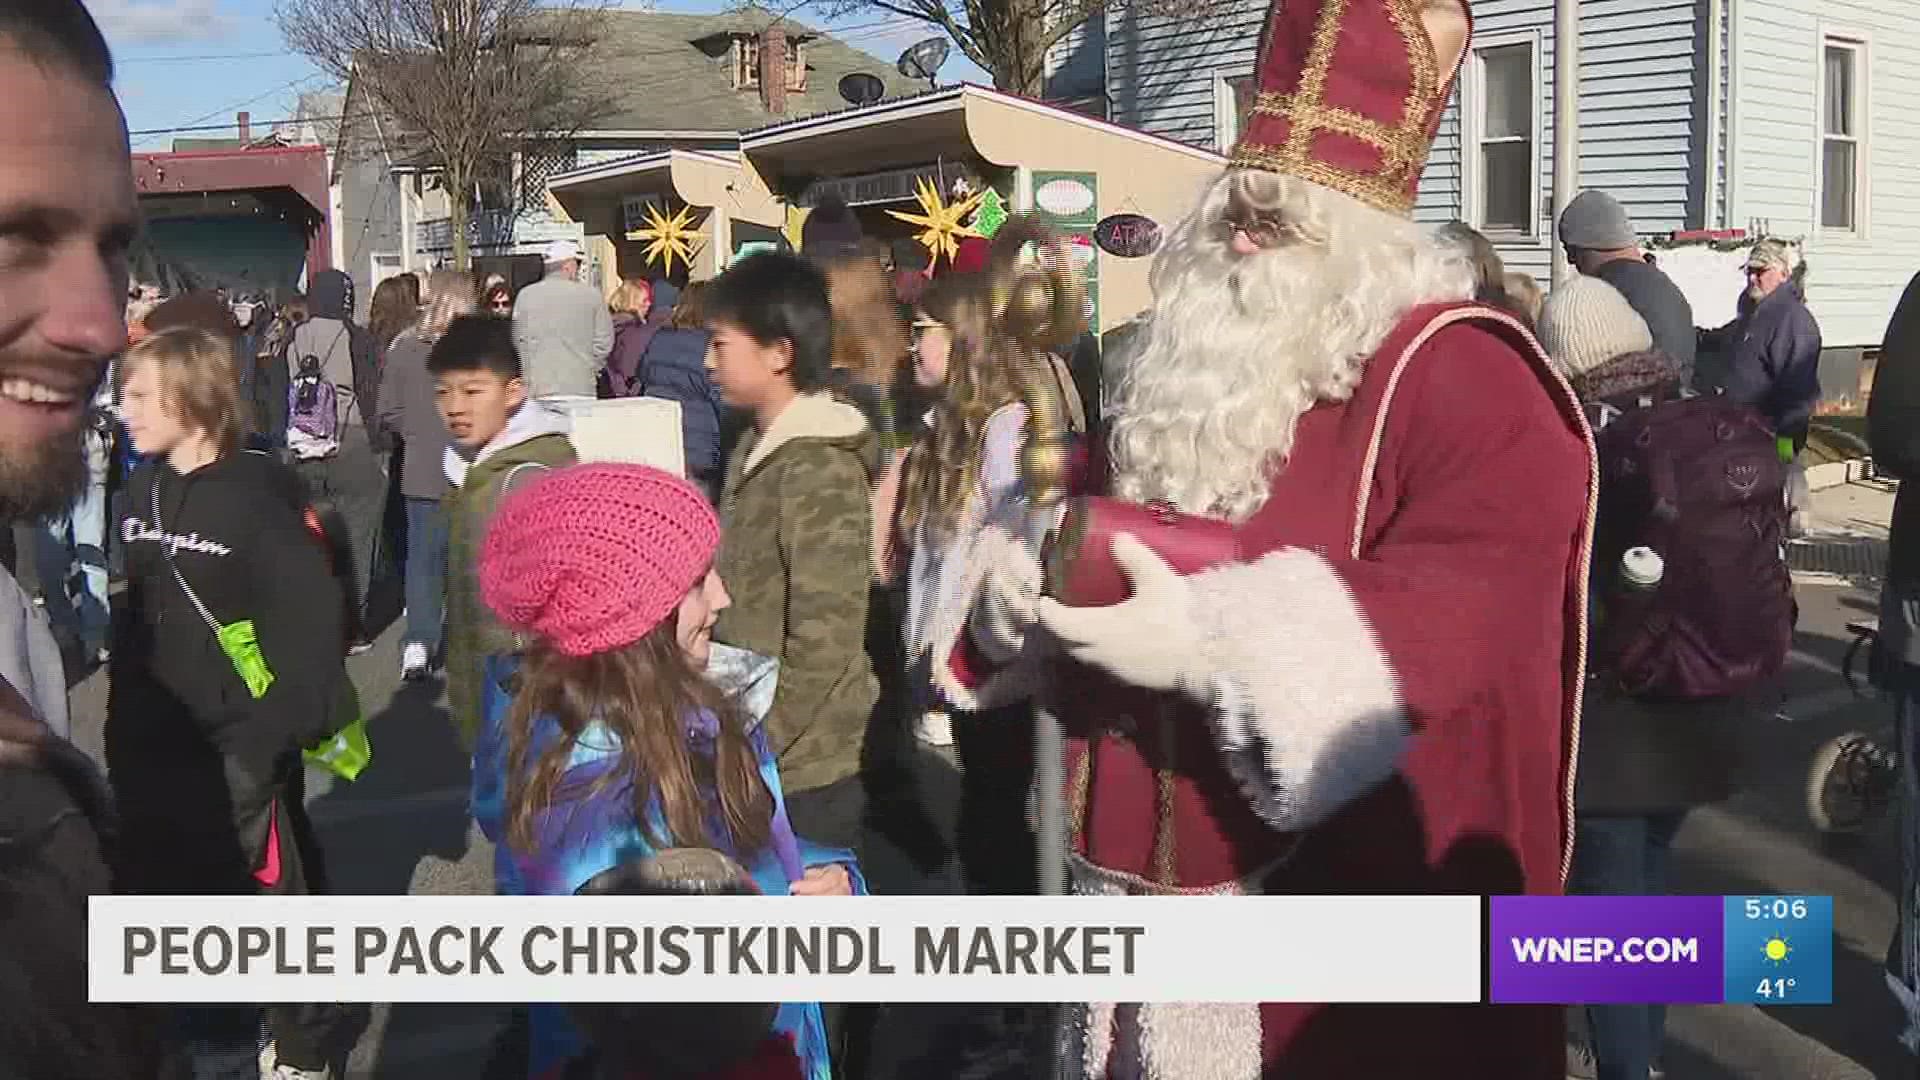 Christkindl Market is here and as Newswatch 16's Nikki Krize shows us, it was packed with people.